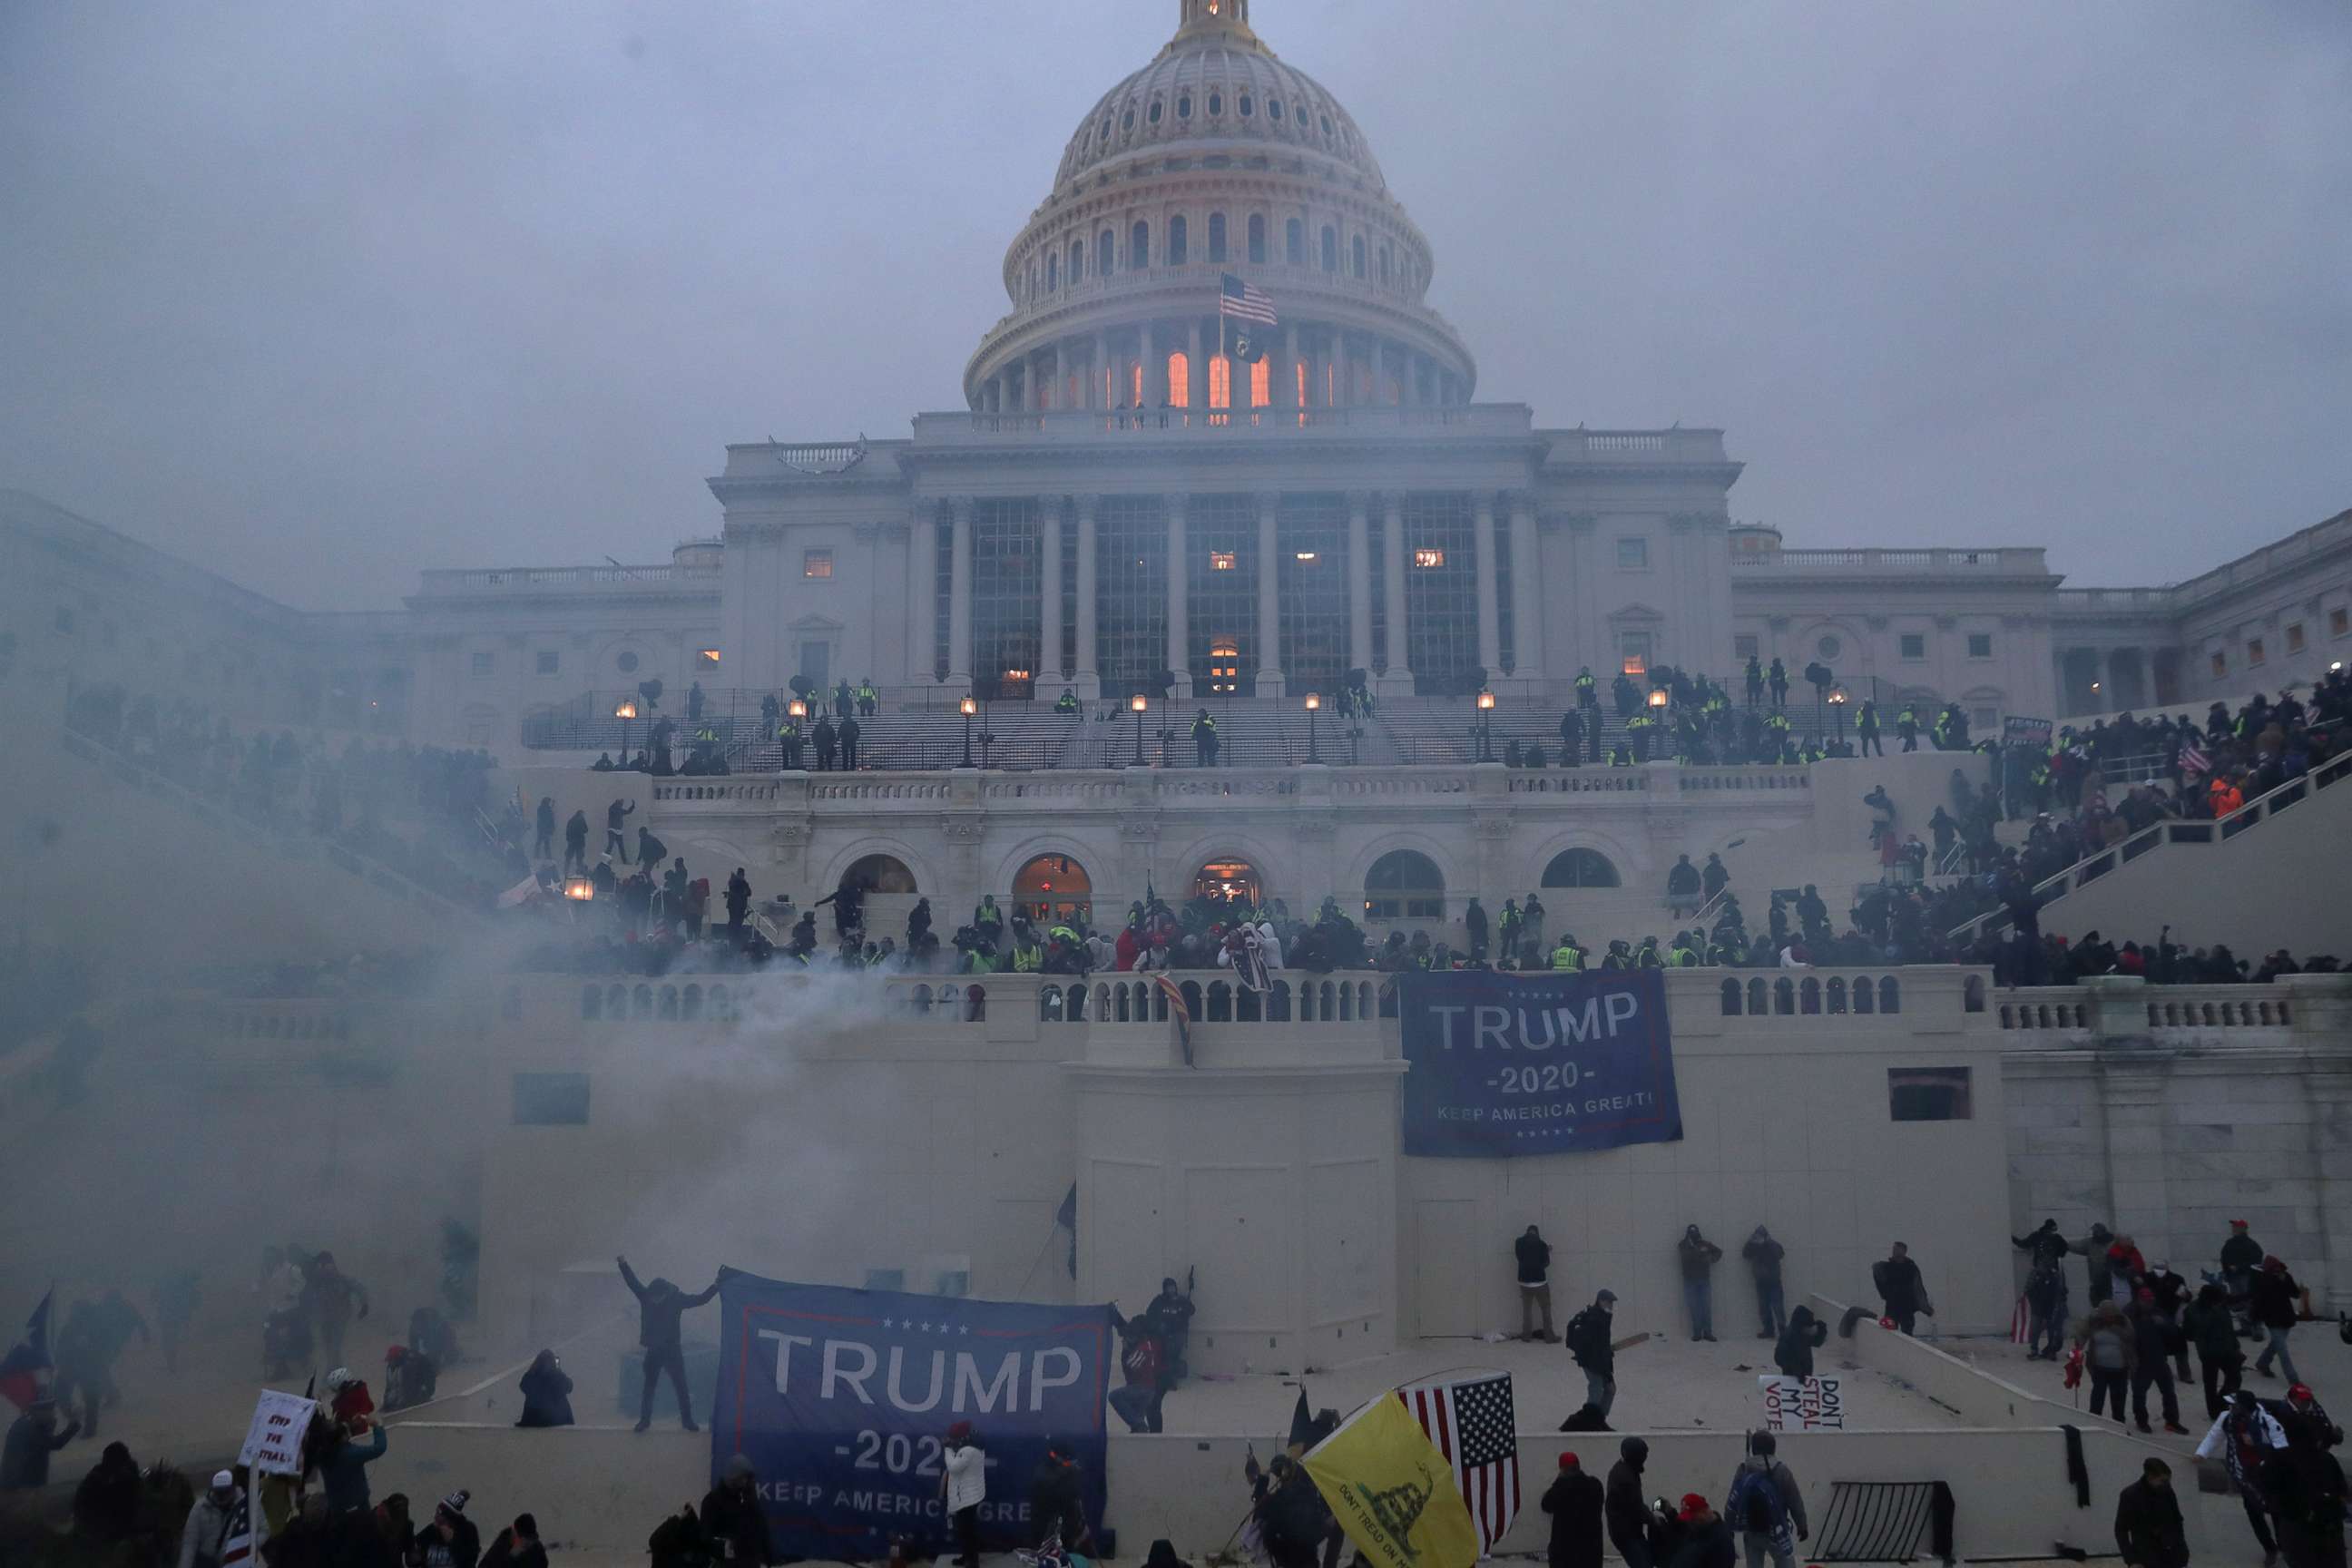 PHOTO: Police officers stand guard as supporters of President Donald Trump gather in front of the U.S. Capitol Building in Washington, D.C., Jan. 6, 2021.